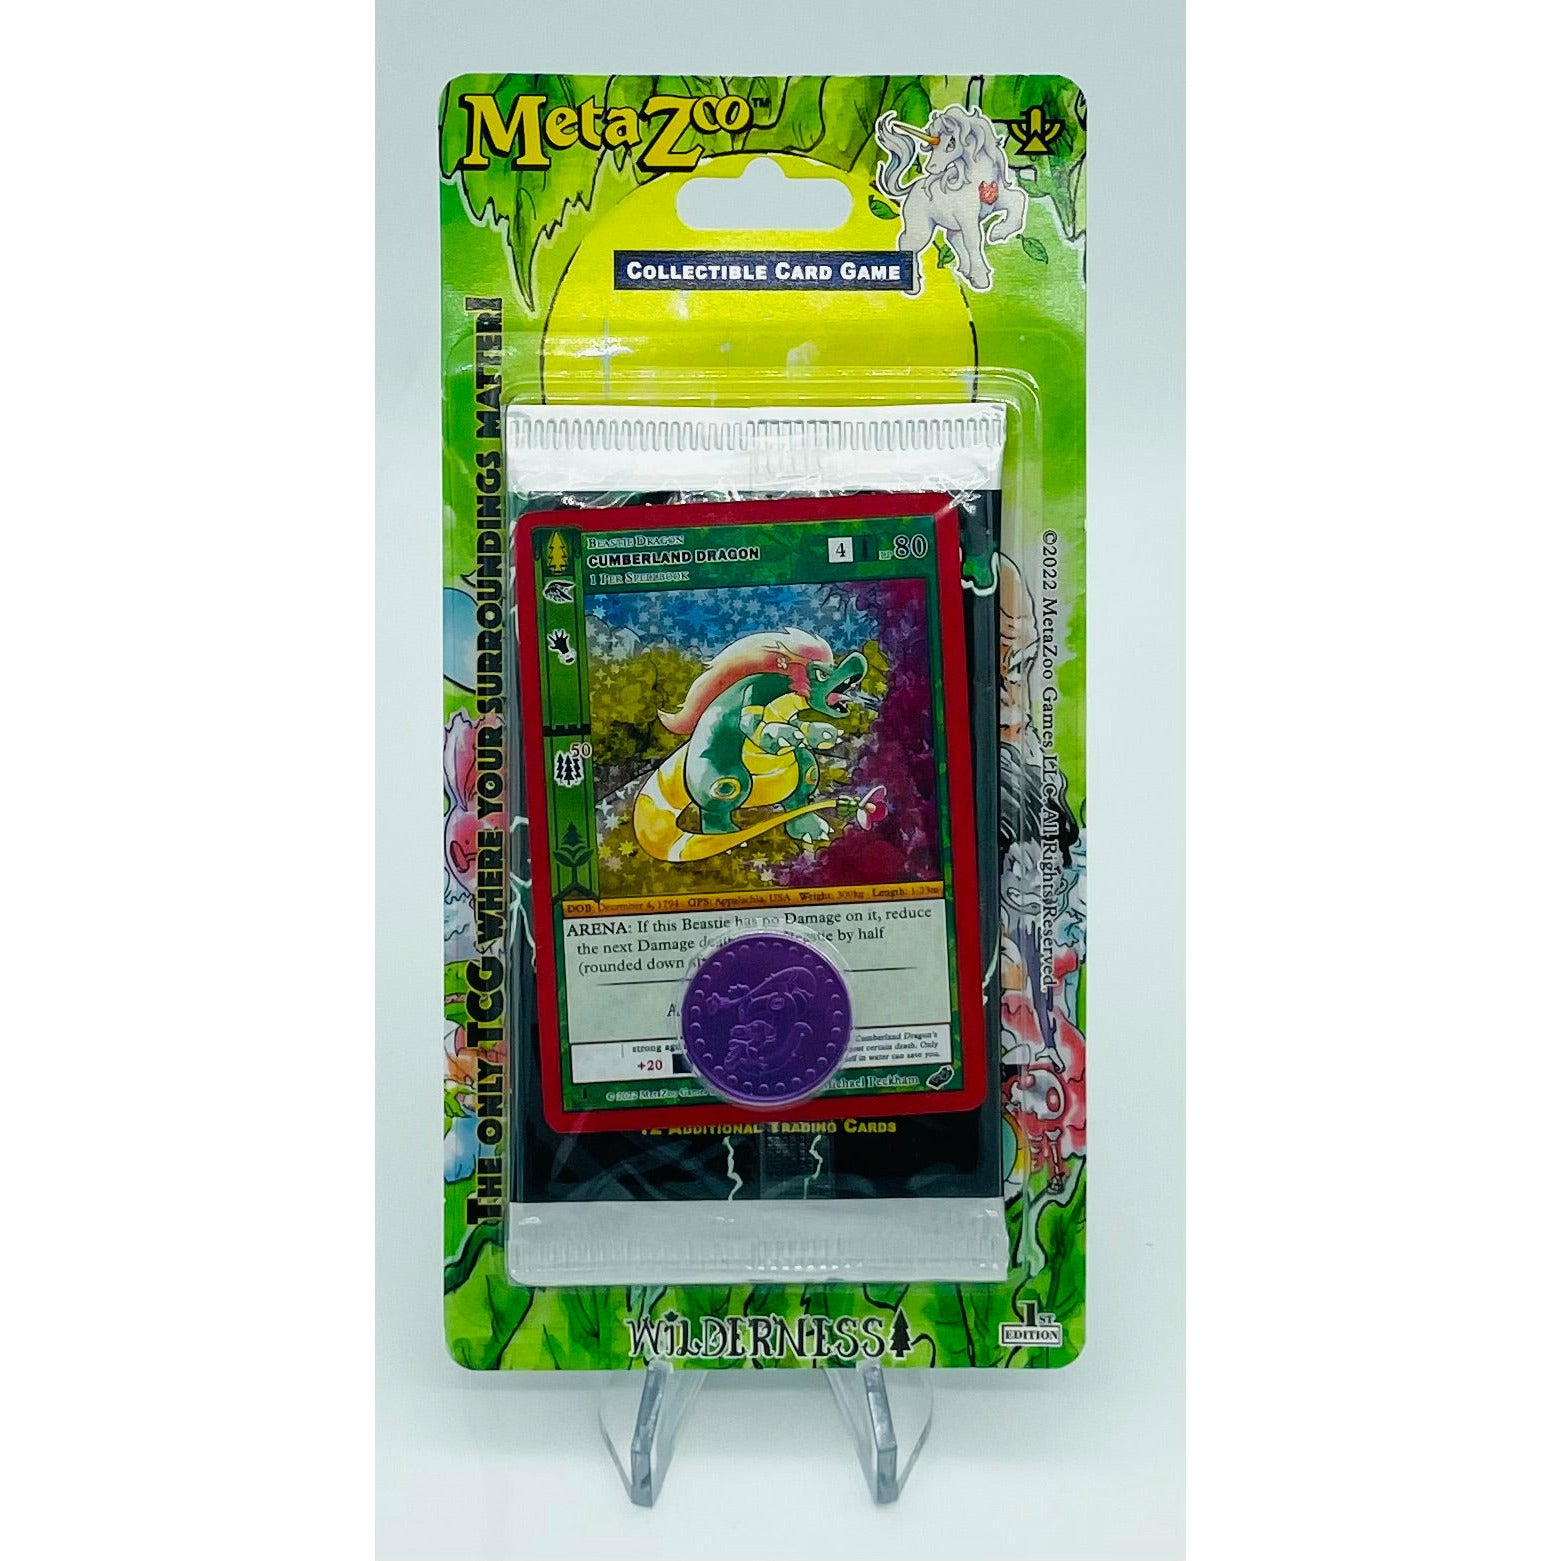 Metazoo Wilderness Blister Pack - 1ST EDITION With Cumberland Dragon Card & Coin